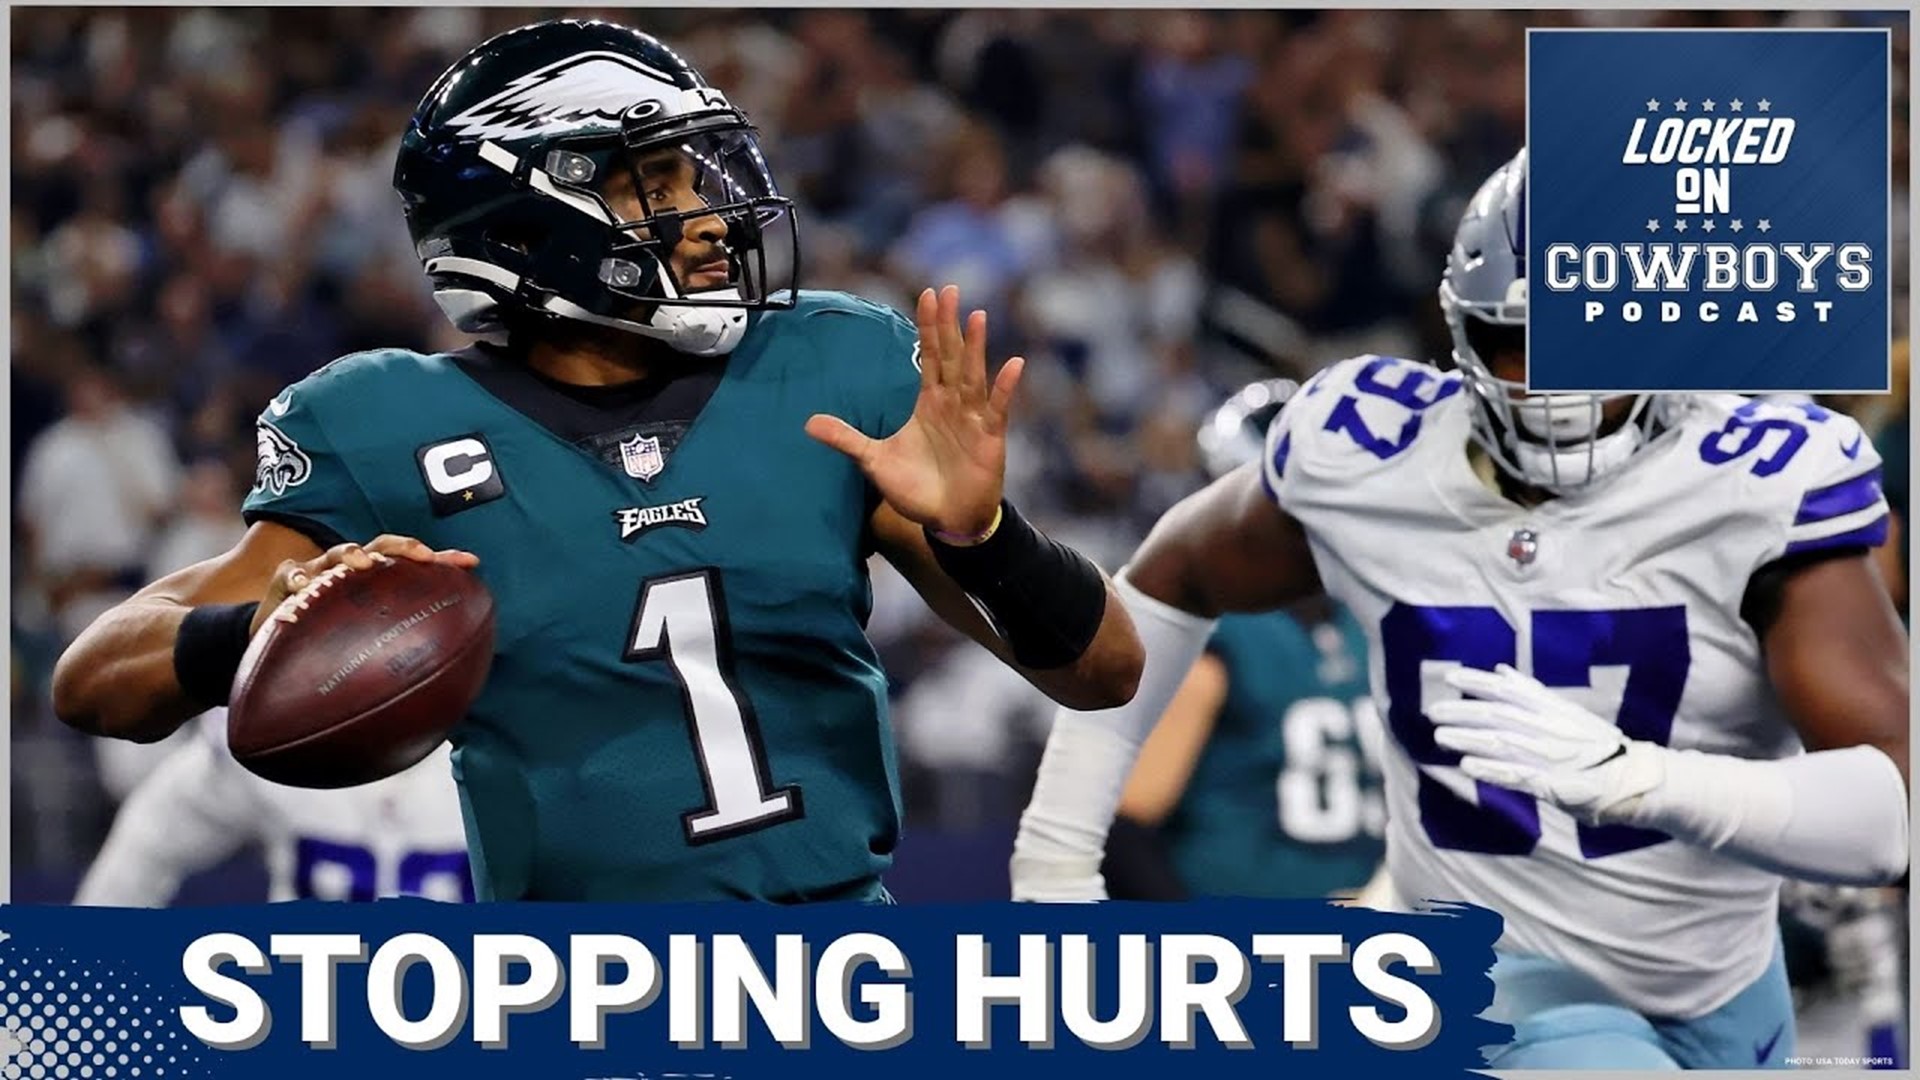 The Dallas Cowboys will need to find a way to slow down Eagles QB Jalen Hurts if they want to win in Week 9